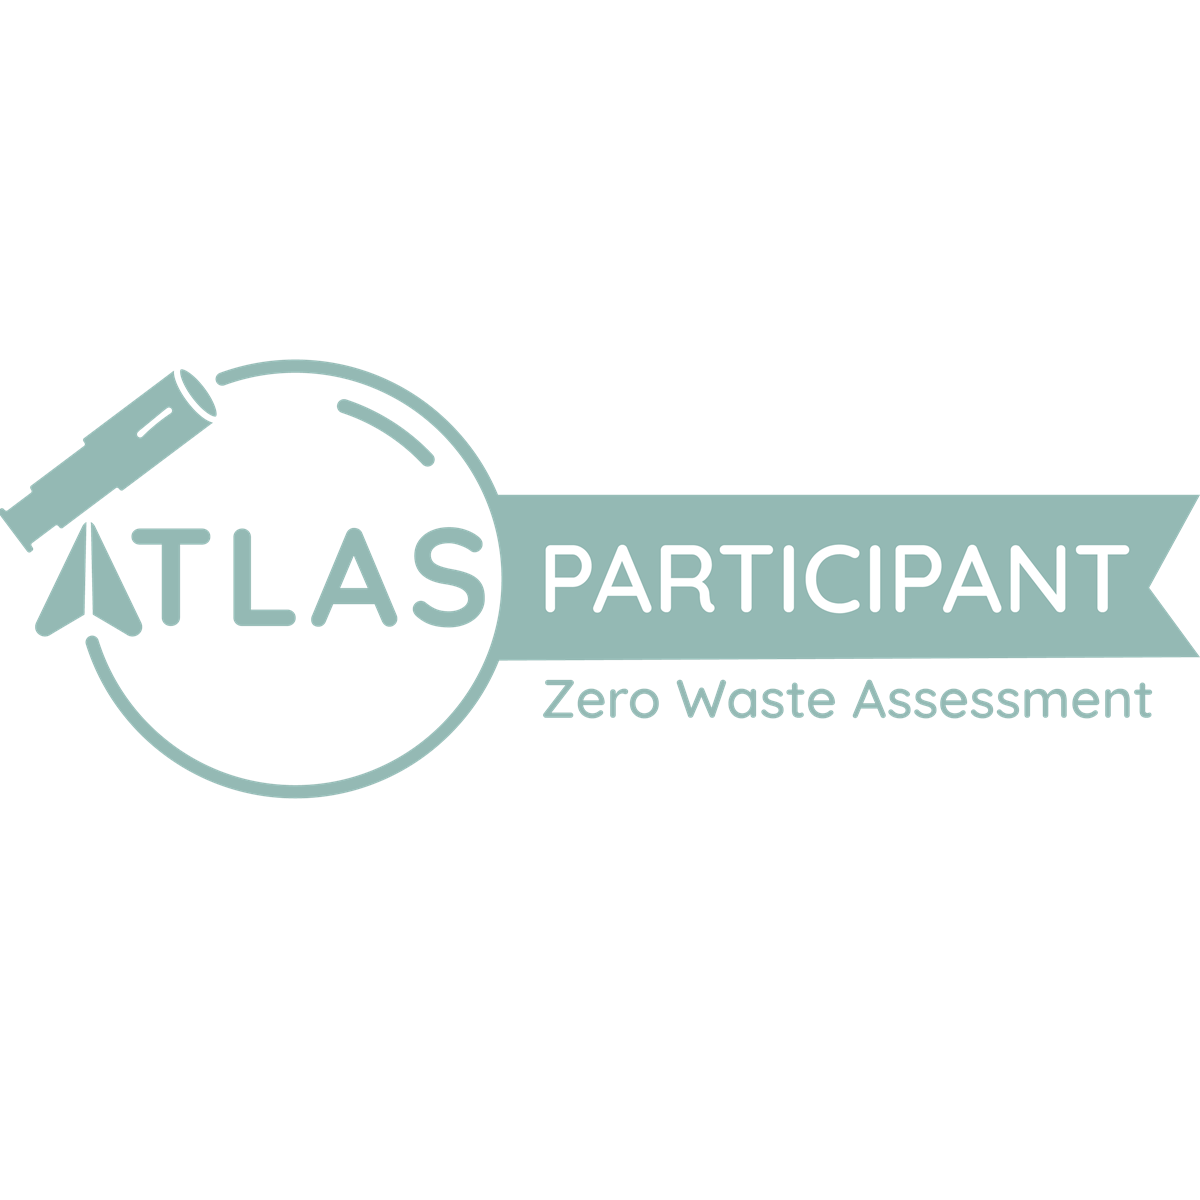 Atlas Zero Waste Certification is a campus rating system released by the Post-Landfill Action Network (PLAN), a national non-profit organization that supports students and staff leading the Zero Waste Movement on college campuses across the country.